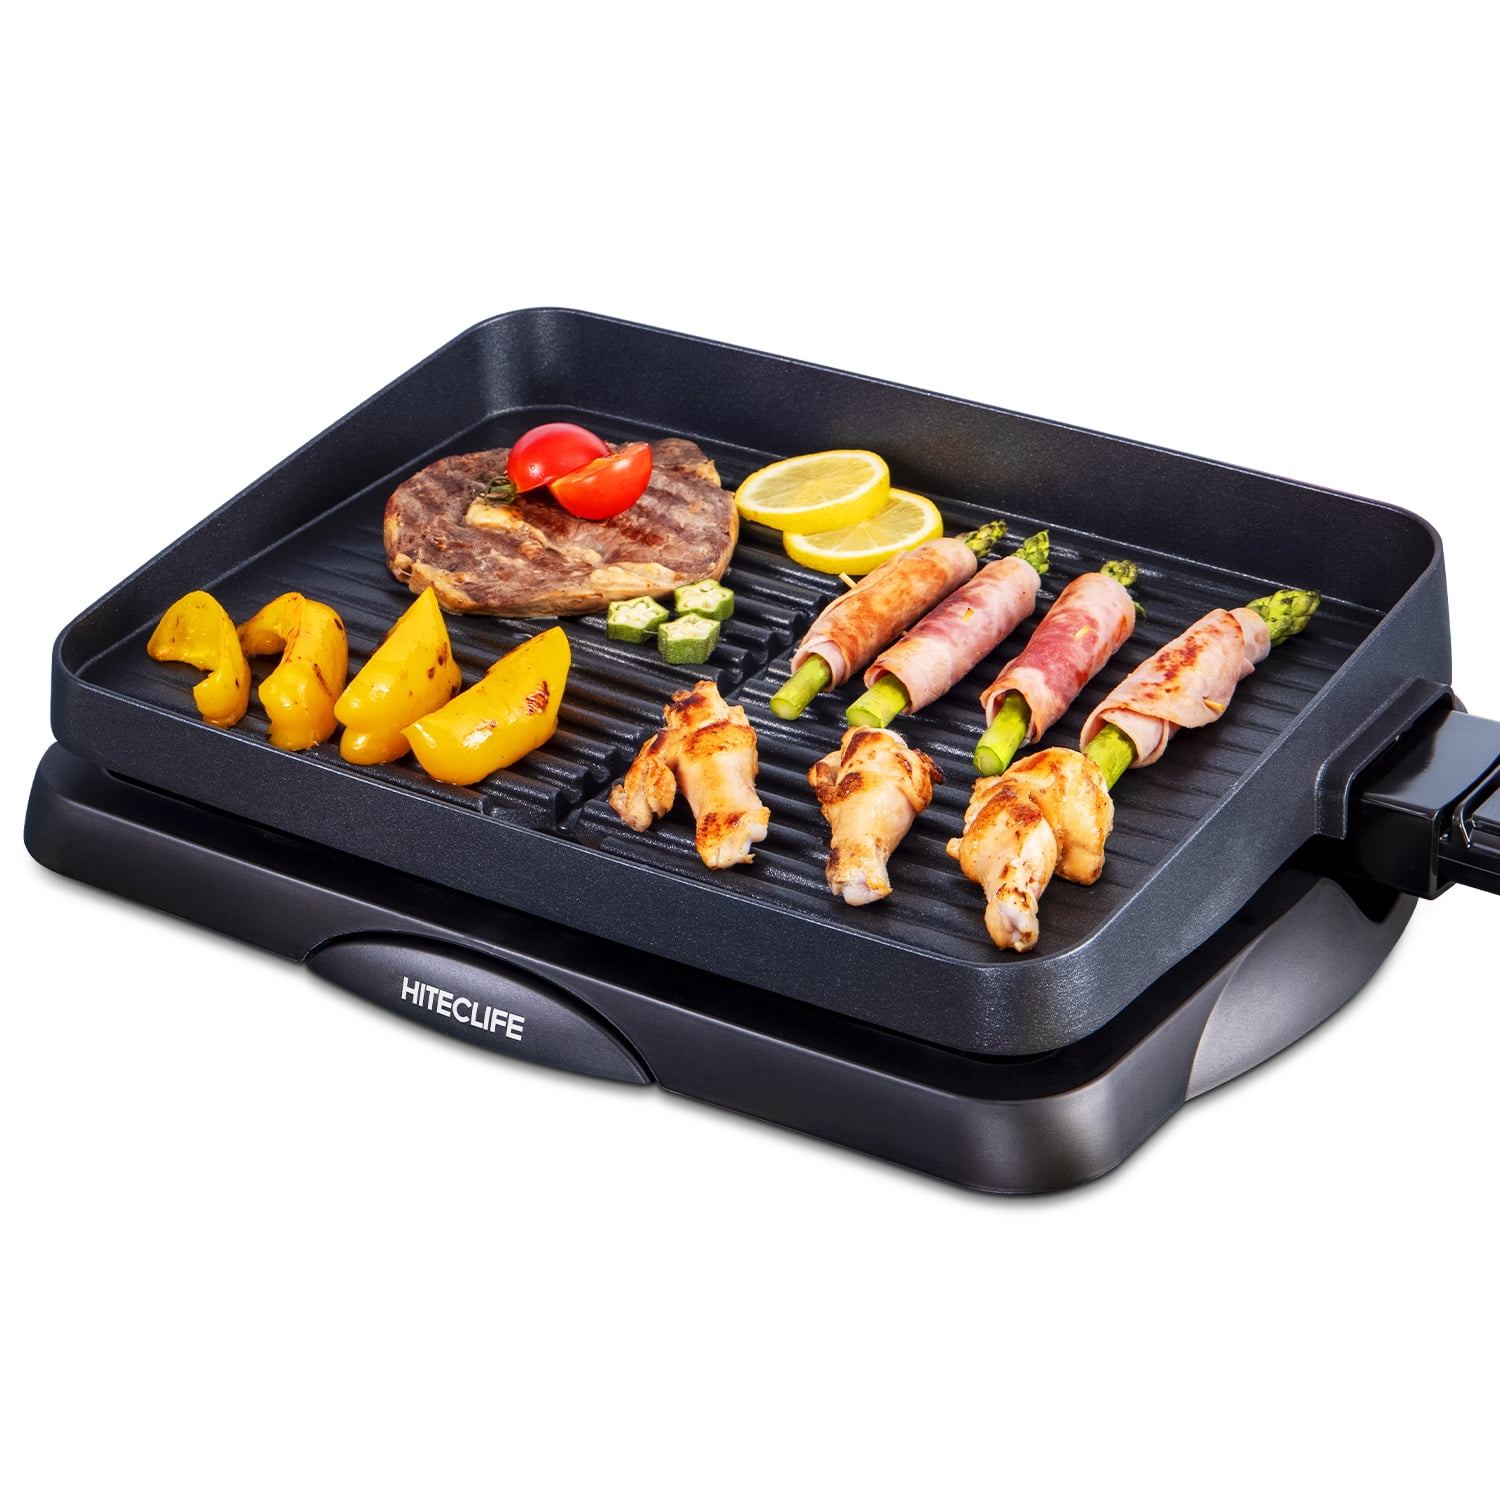 Smokeless BBQ Machine,with Adjustable Temperature Control 1500W Commercial Electric Flat Top Griddles 24 inch for Cooking Pancakes,Non-Stick Electric Grills for Restaurant Indoor&Outdoor